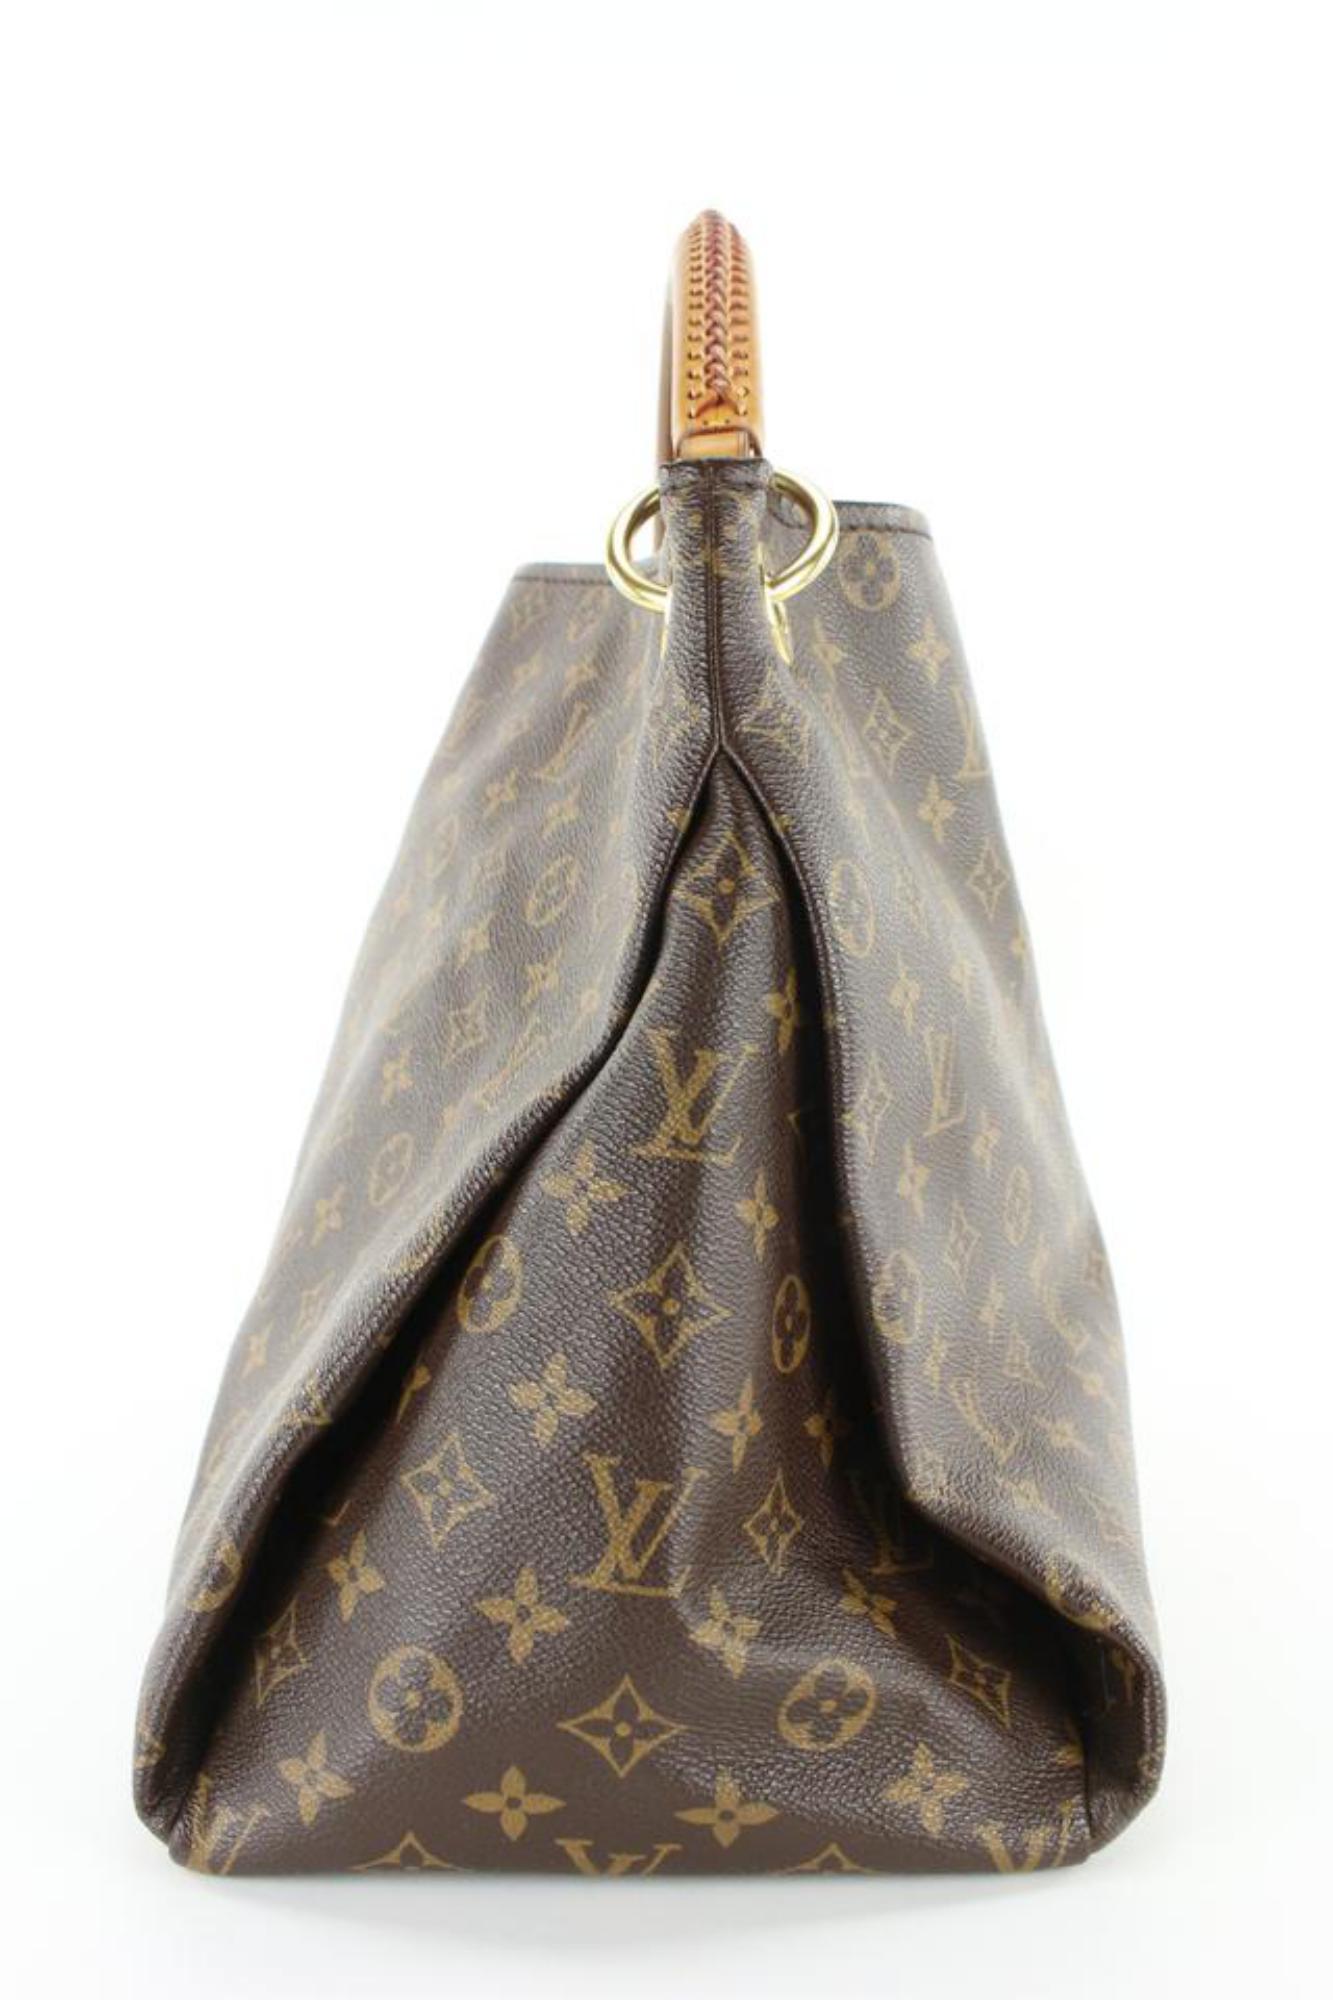 Louis Vuitton Monogram Artsy MM Hobo Bag 10LVJ1027 In Good Condition For Sale In Dix hills, NY